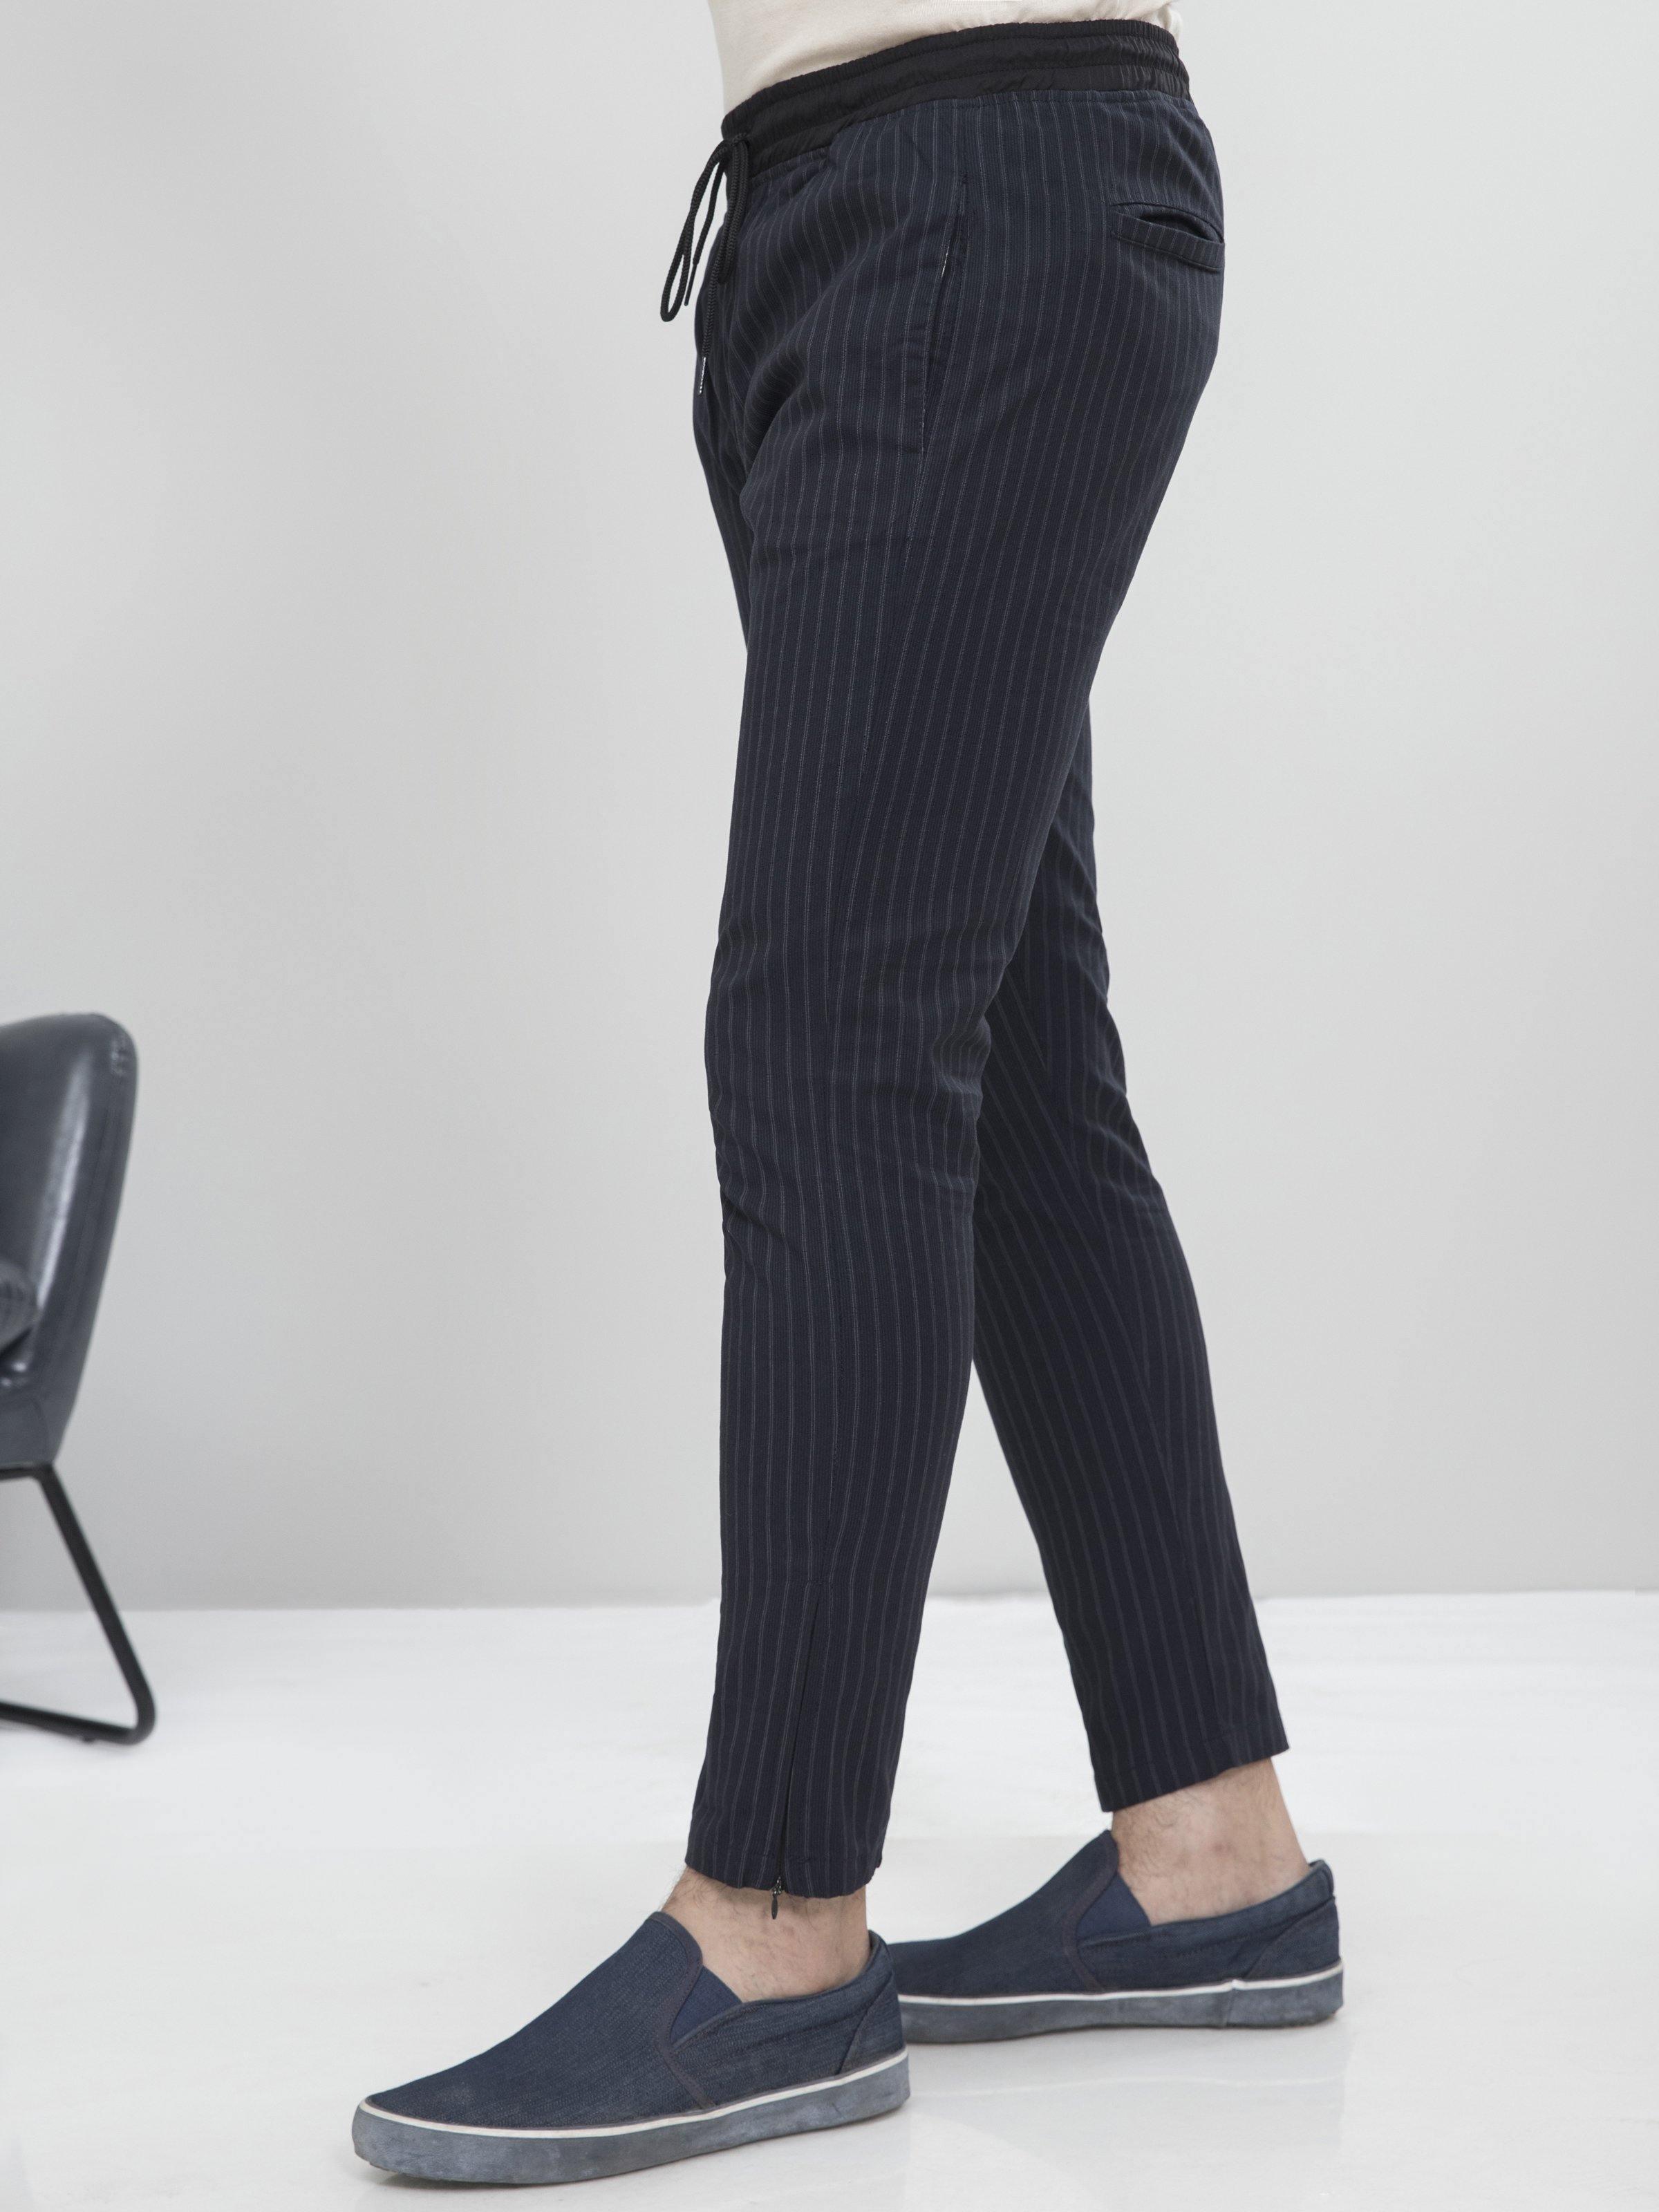 CASUAL TROUSER TAPERED FIT CHARCOAL GREY at Charcoal Clothing